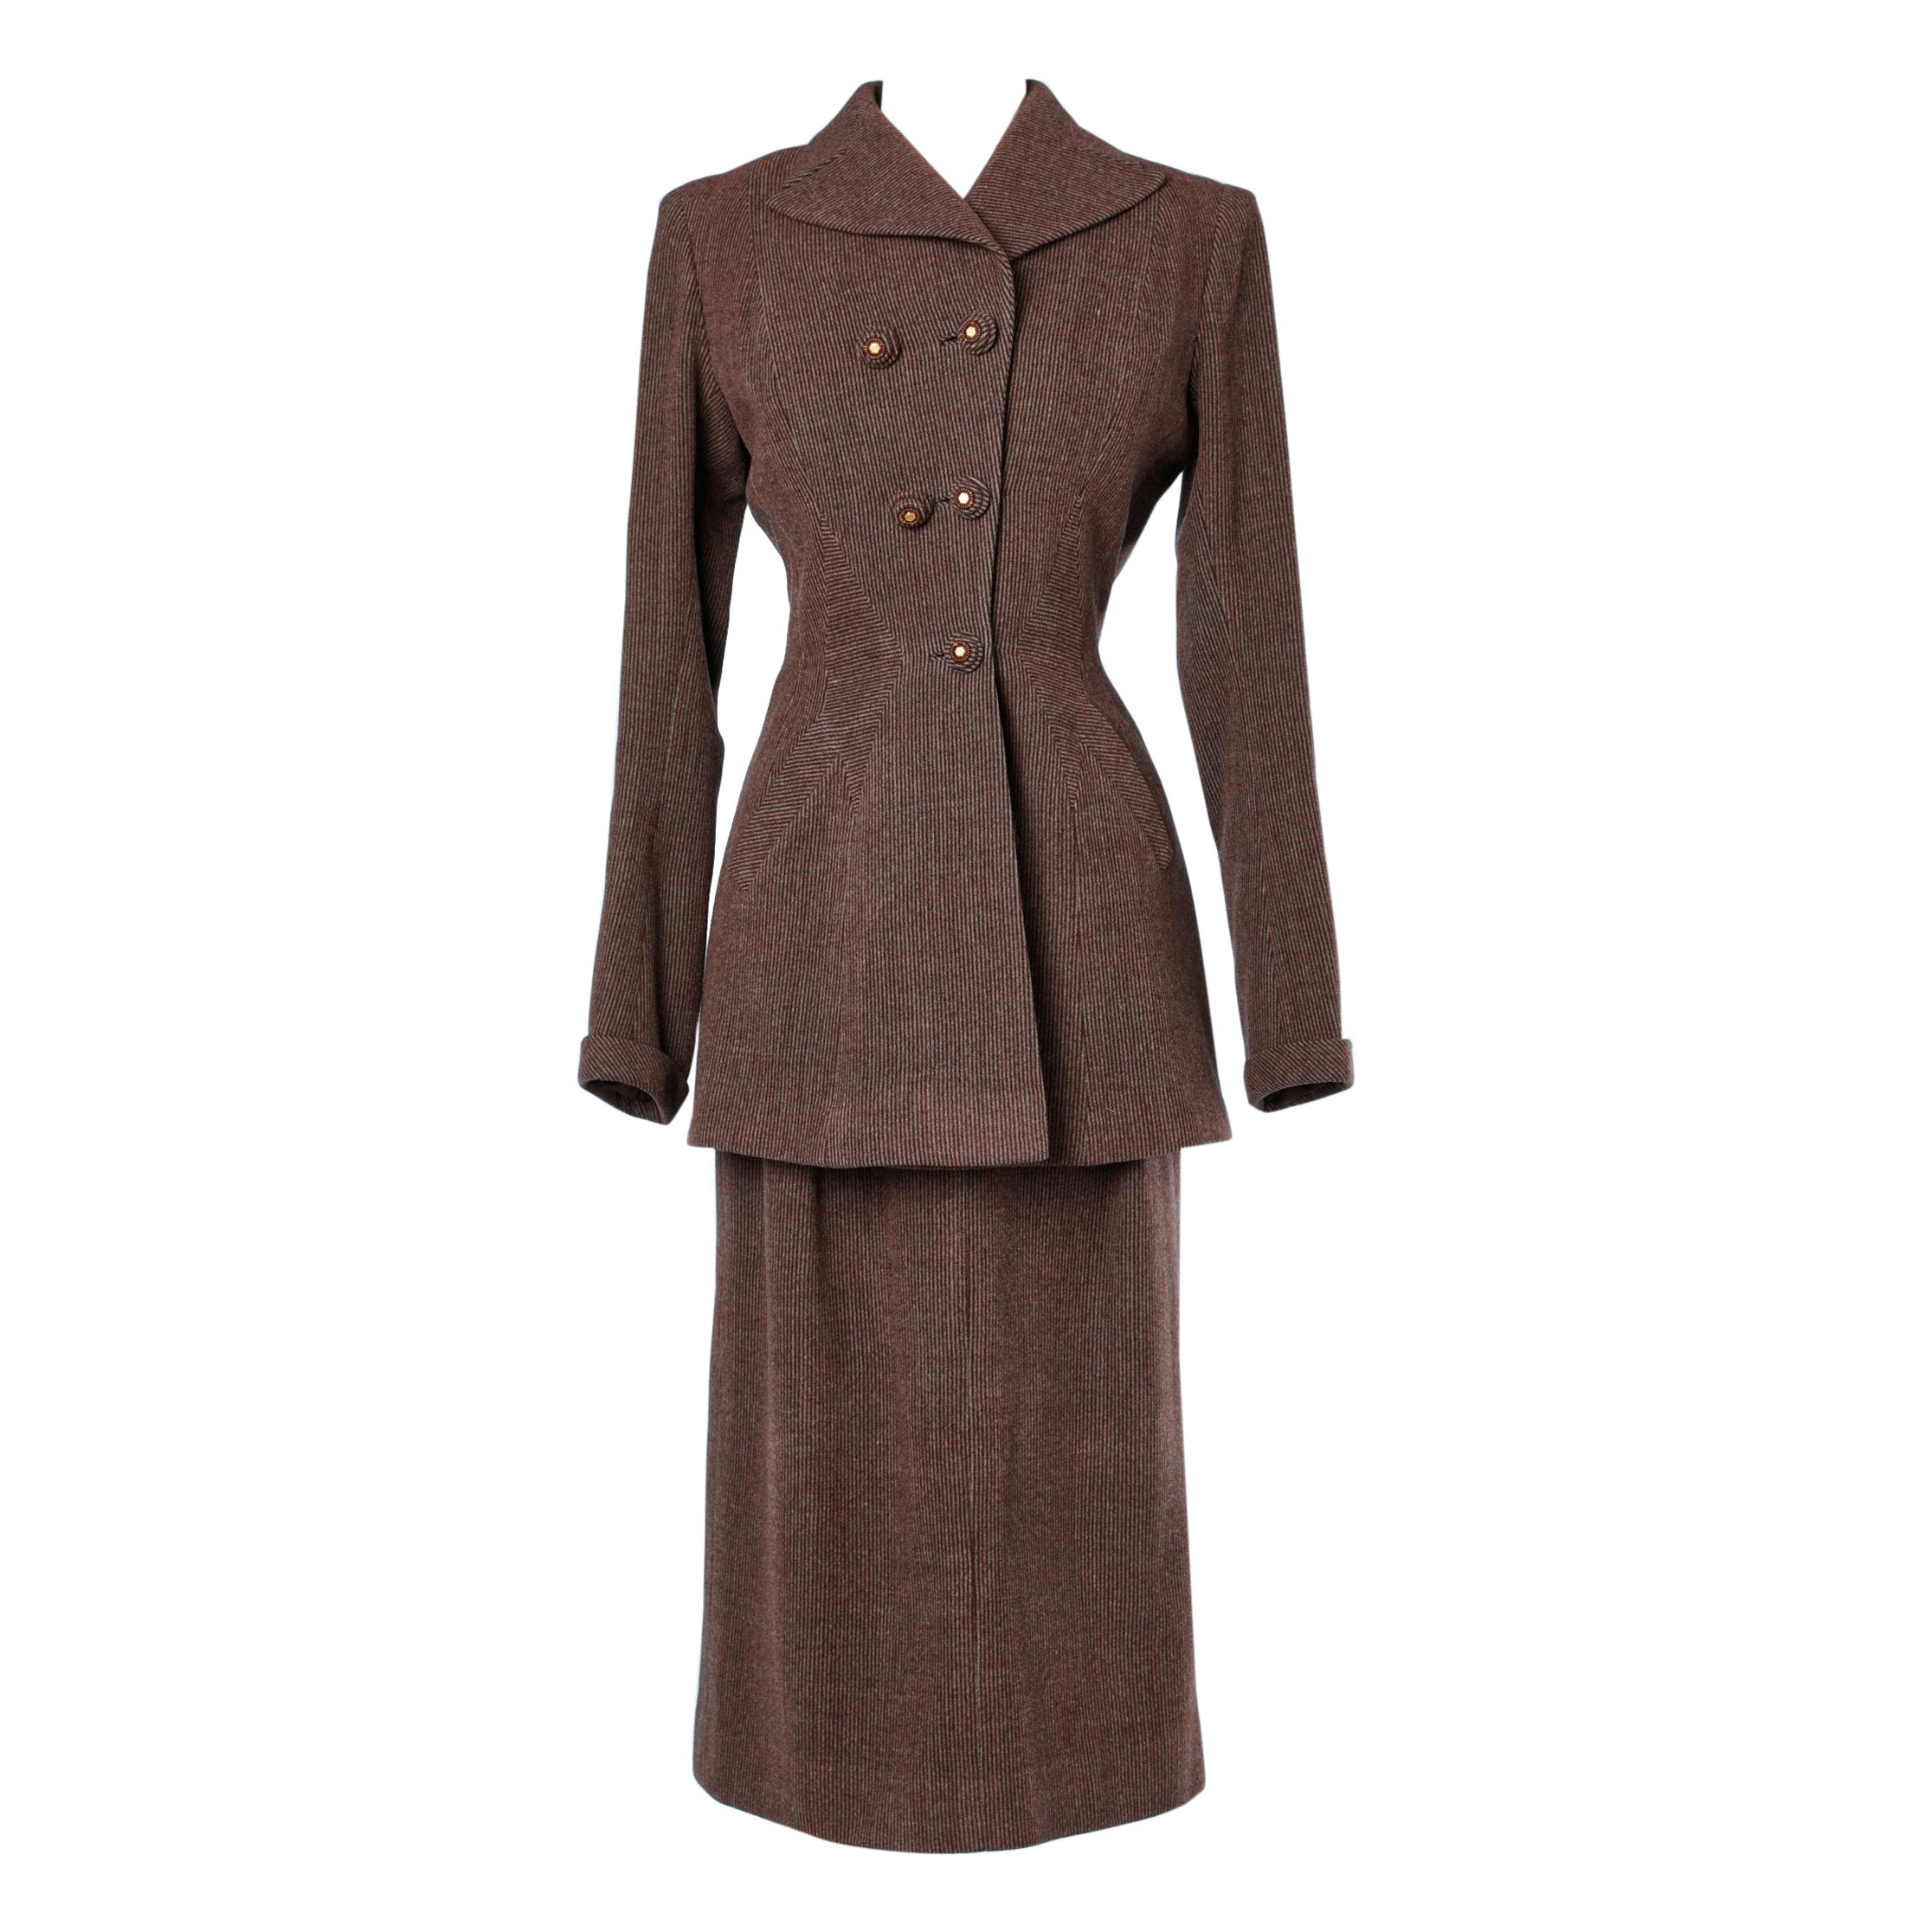 Maggy Rouff numbered Skirt-suit Circa 1940  For Sale